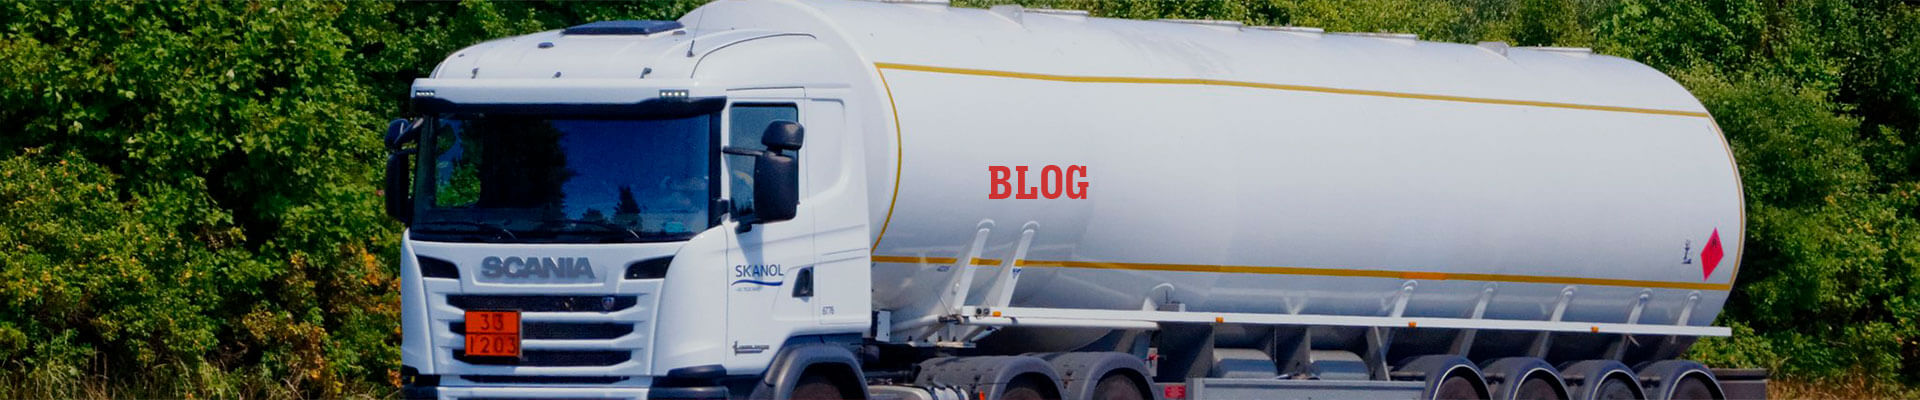 Road Tanker Equipment Market 2021 with Top Countries Data Analysis by Industry Trends, Size, Share, Company Overview, Growth, Development and Forecast by 2027